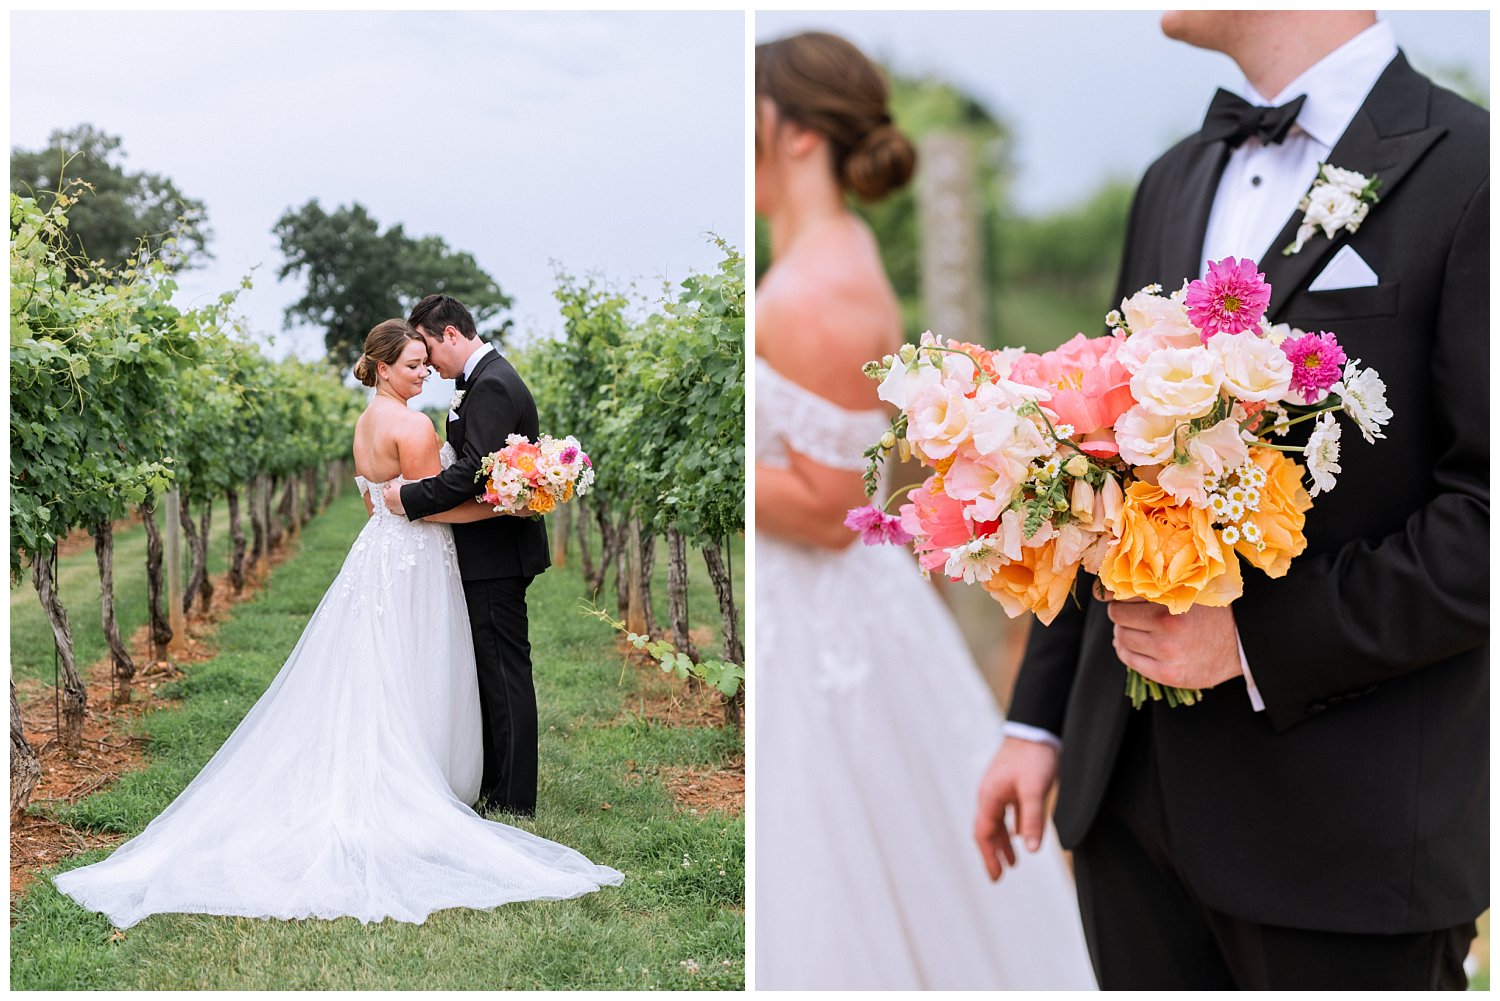 Bride and groom portraits at their colorful summer wedding